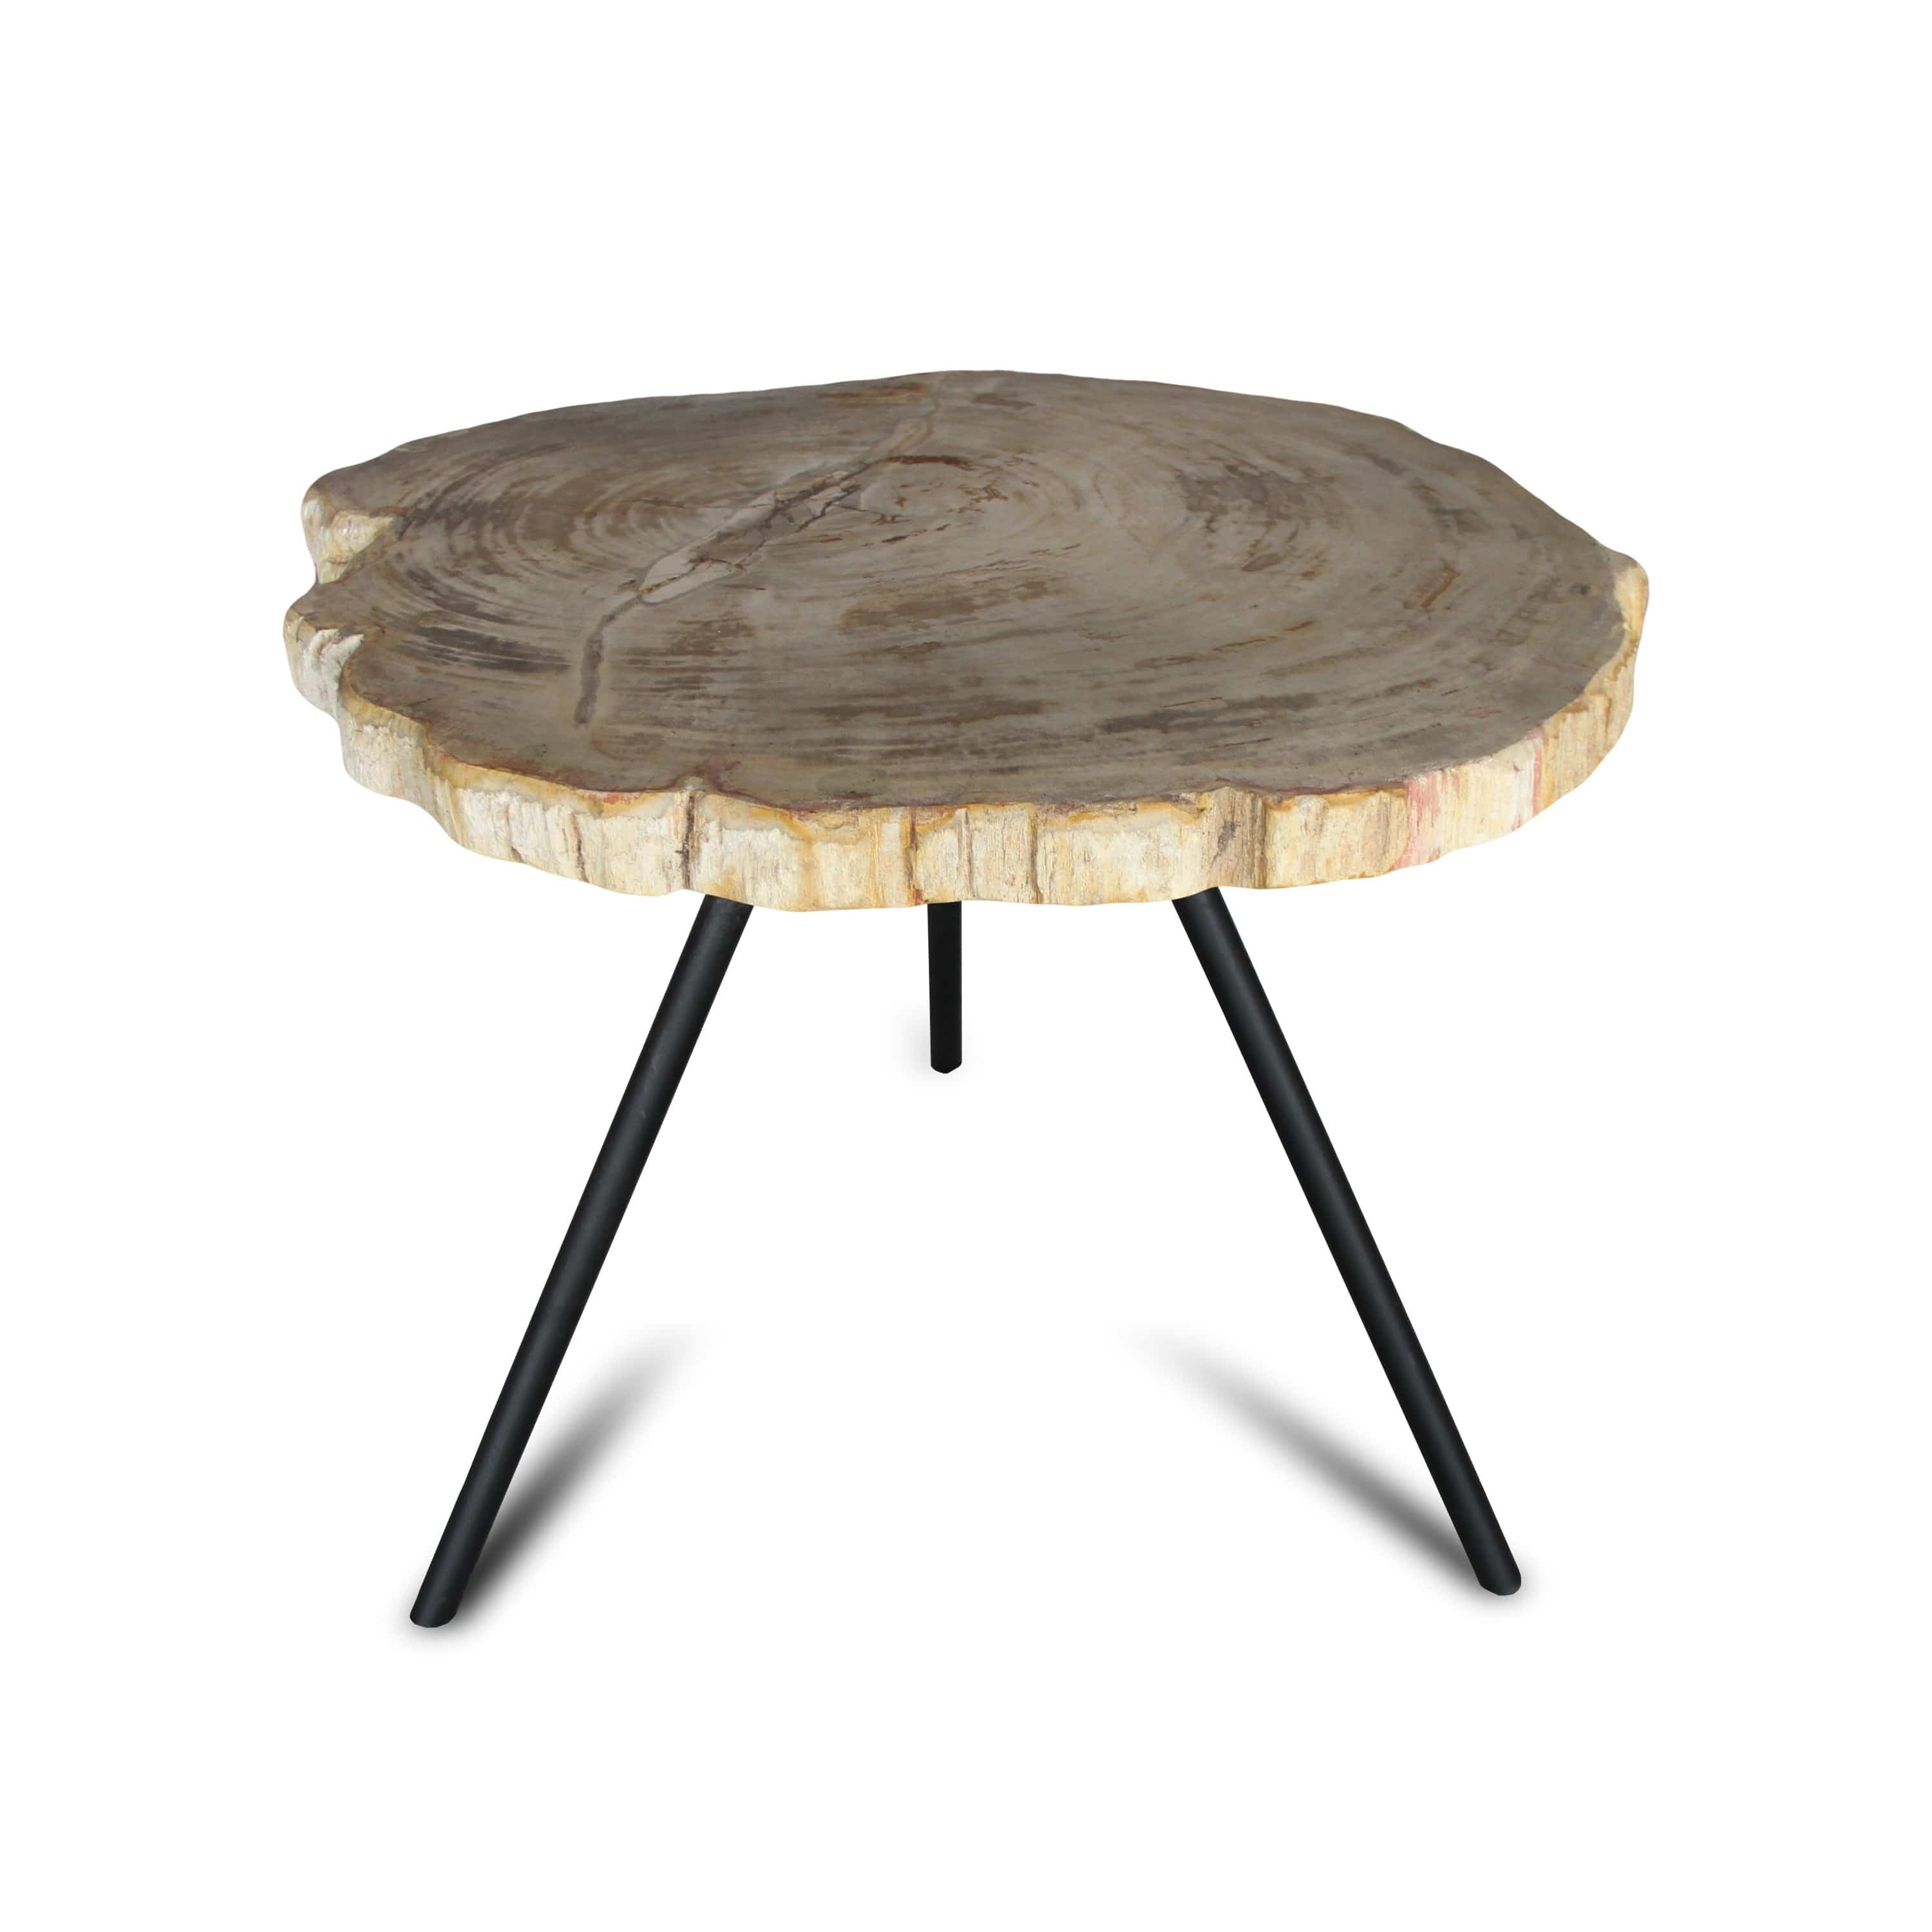 Kalifano Petrified Wood Petrified Wood Round Slice Side Table from Indonesia - 25" / 68 lbs PWT2600.001